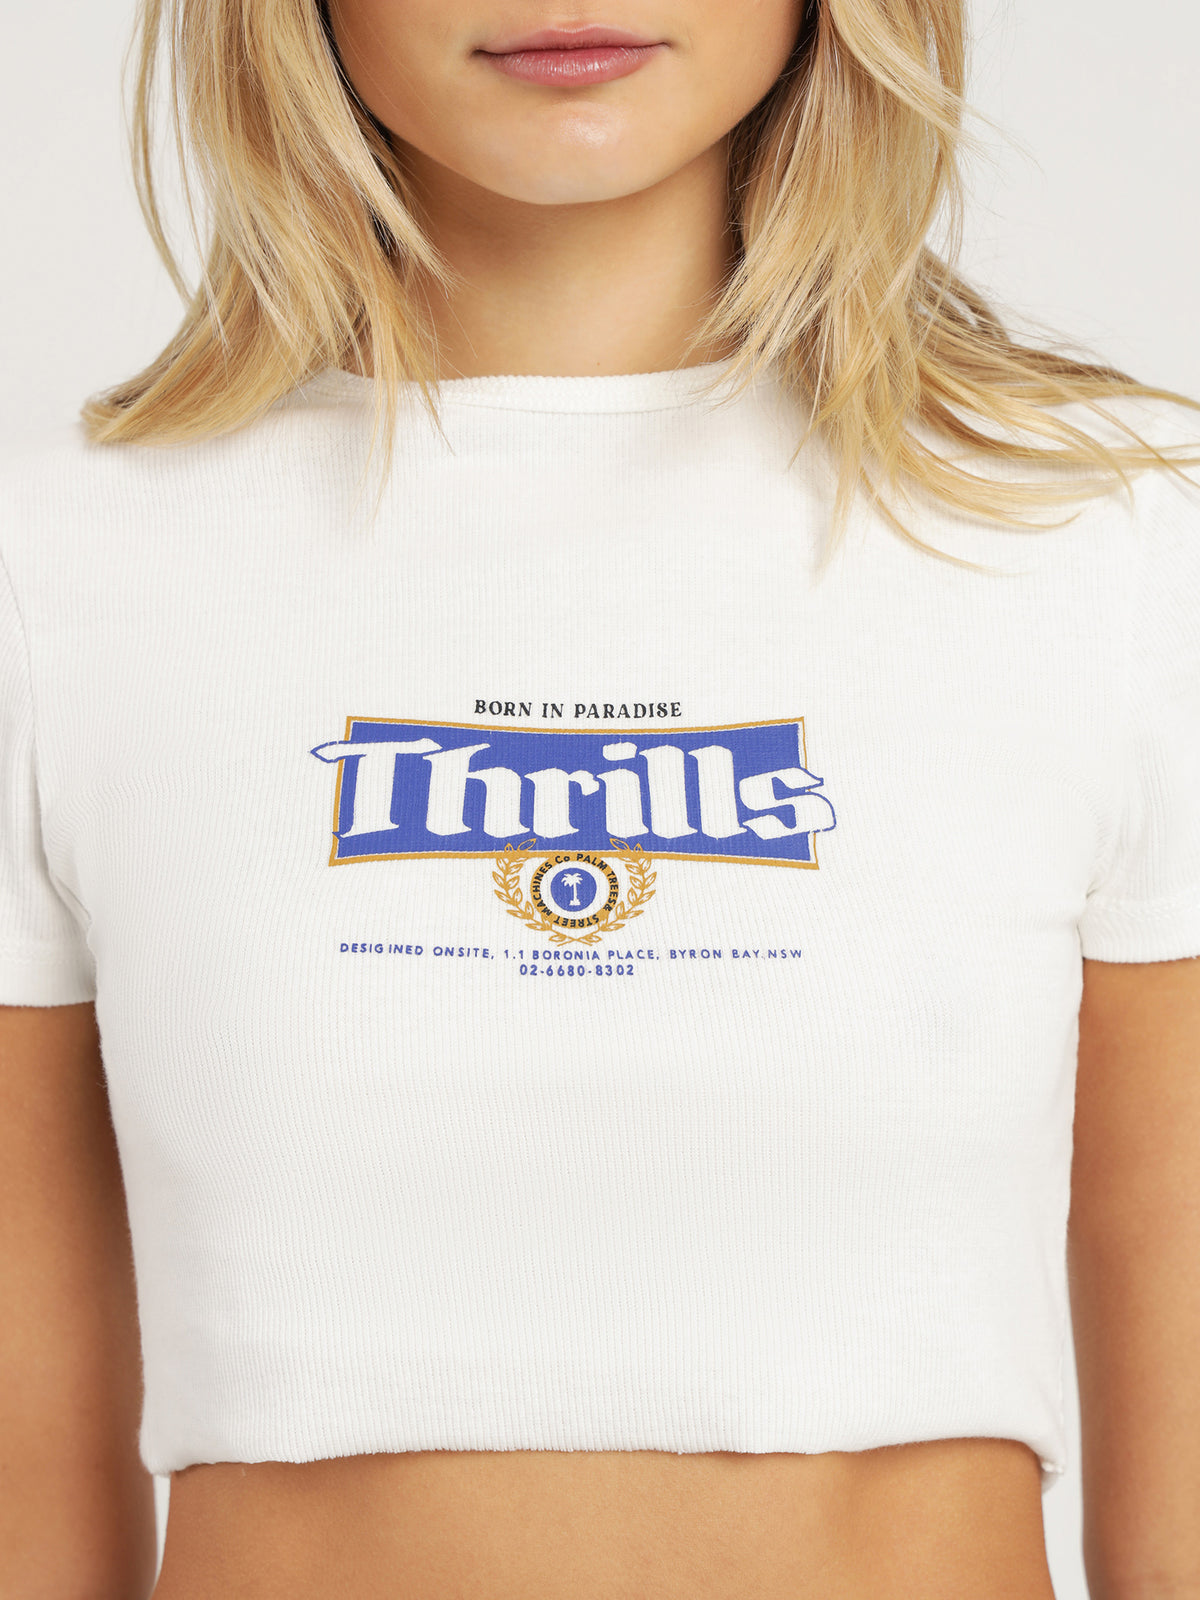 King of Thrills Baby Crop T-Shirt in Dirty White